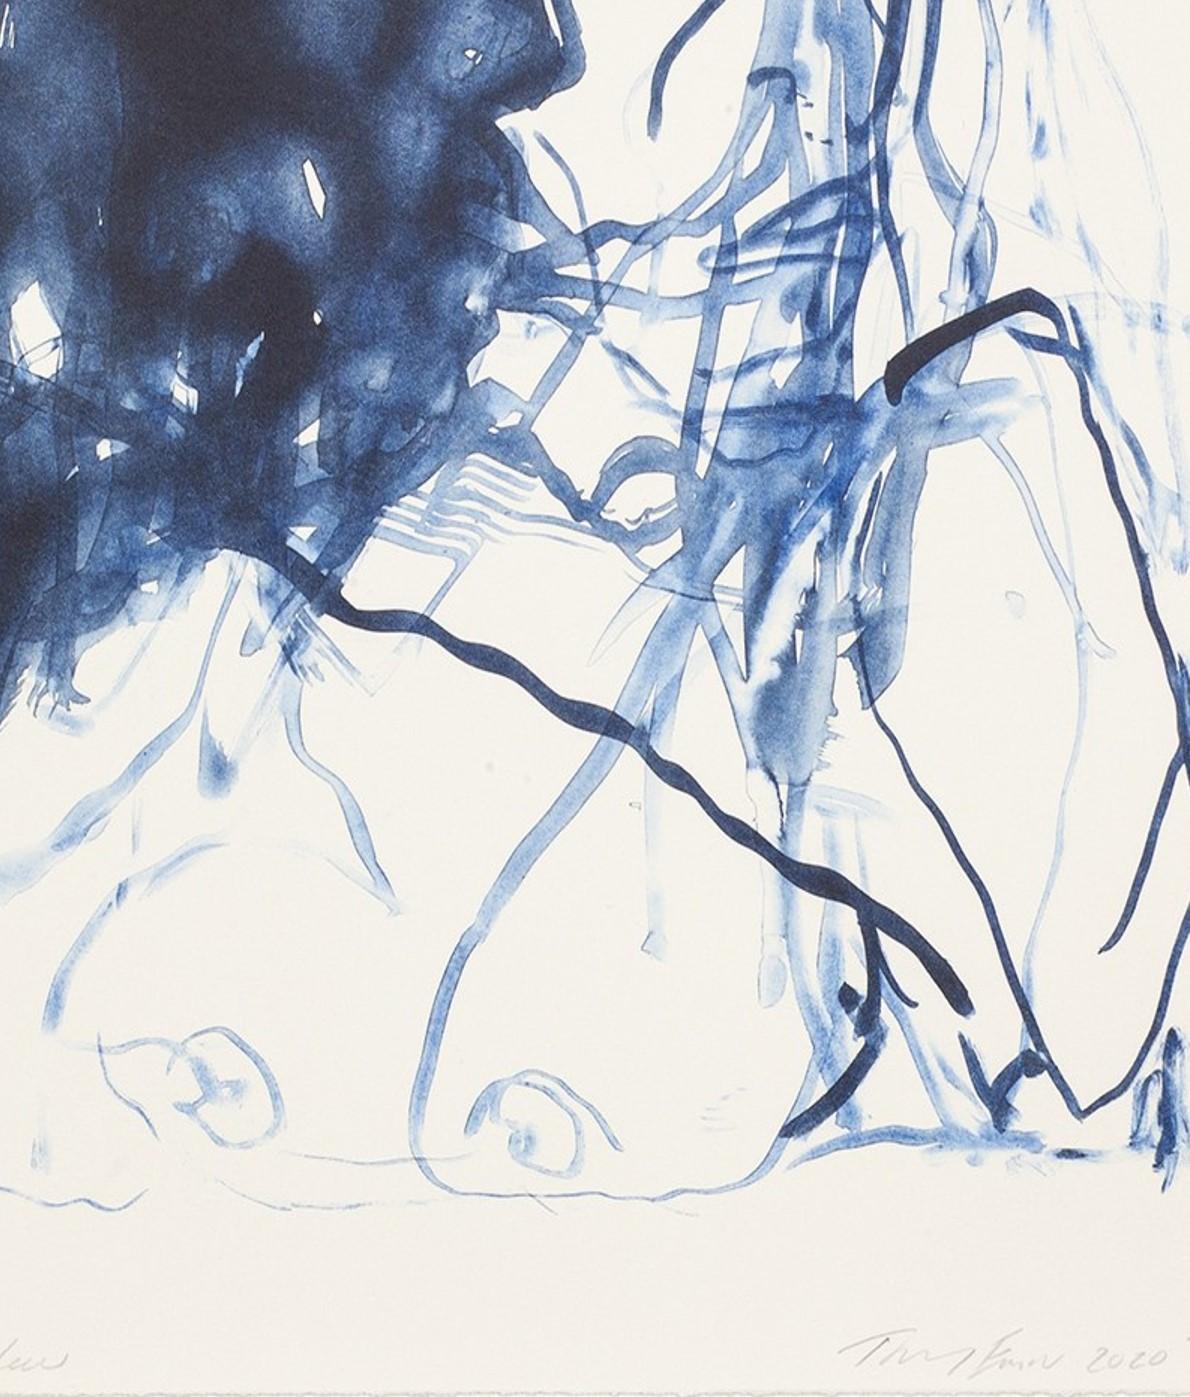 After The Shadow - Emin, Contemporary, YBAs, Lithograph, Blue, Portrait - Young British Artists (YBA) Print by Tracey Emin